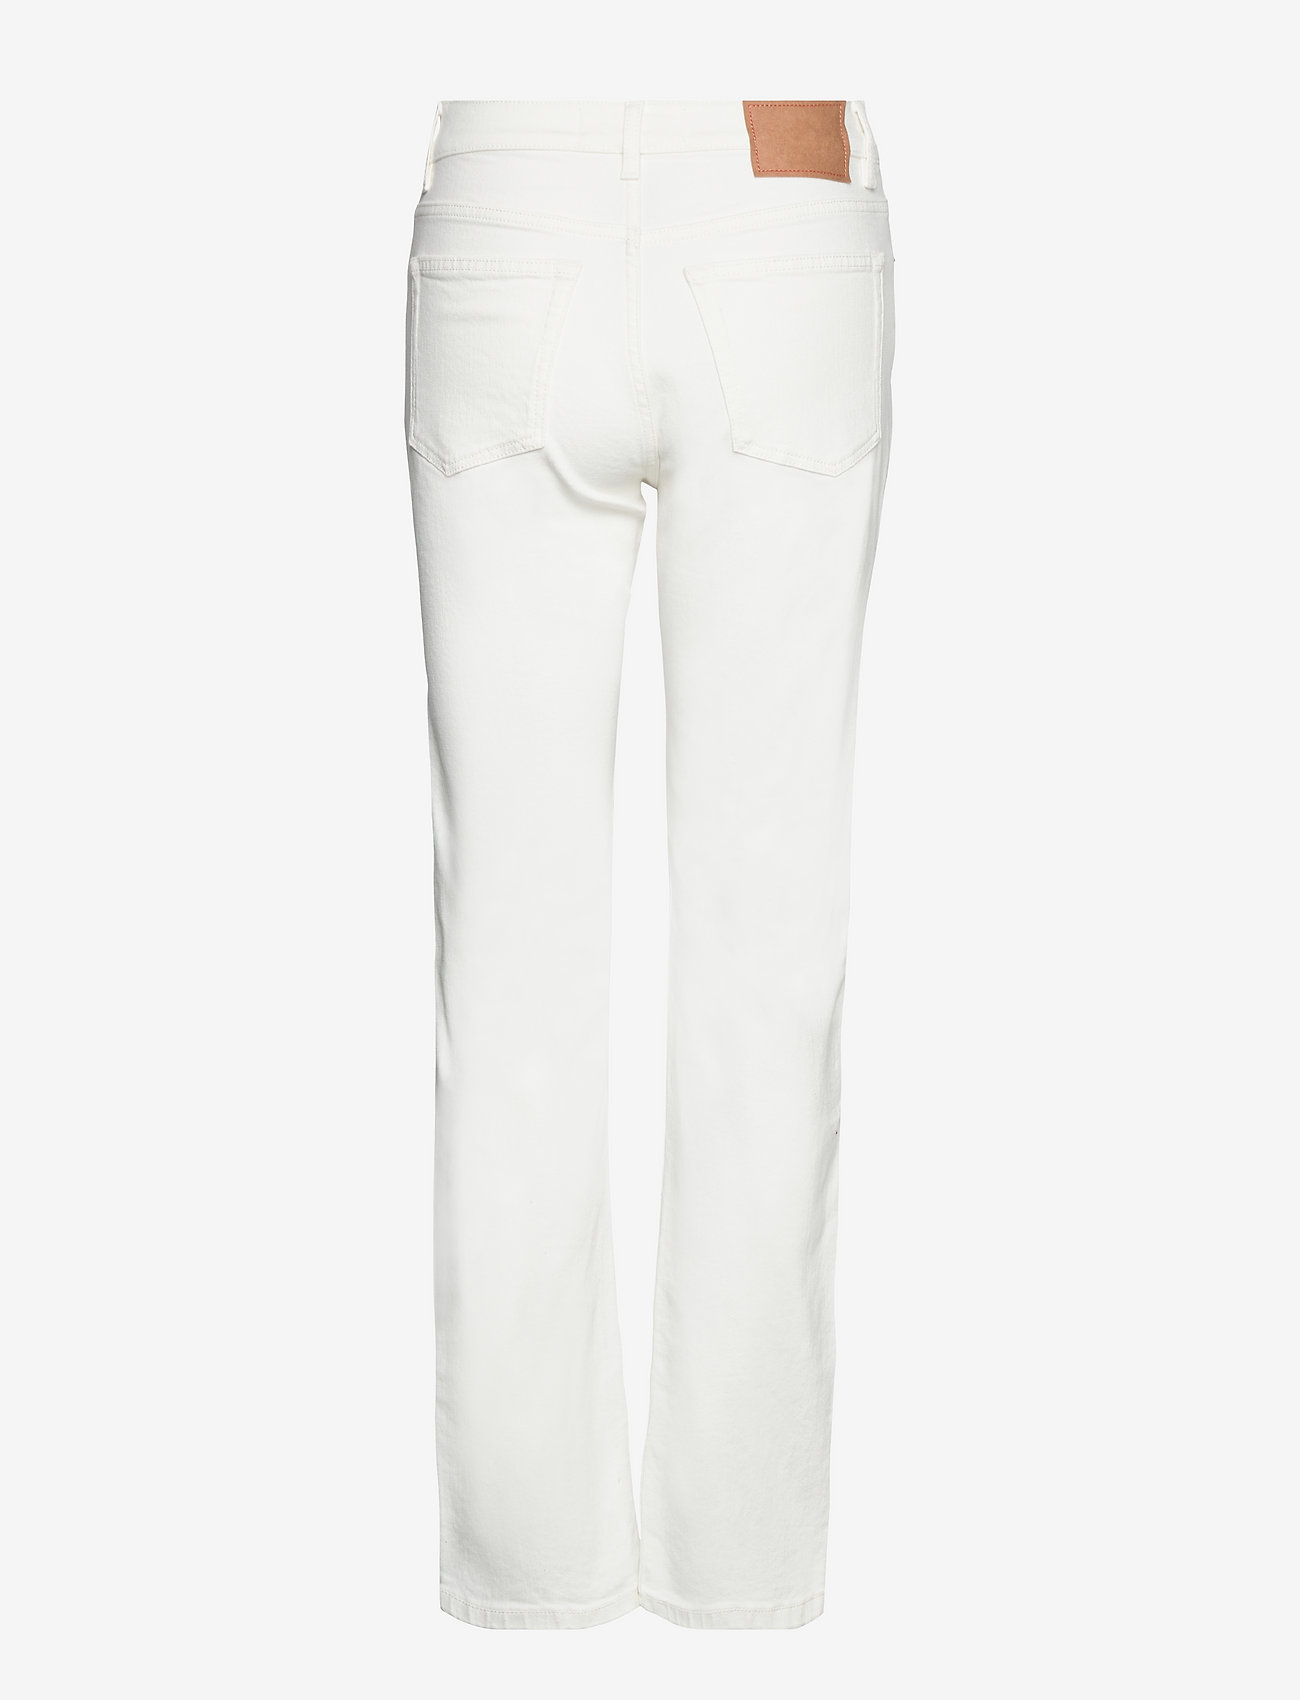 Jeanerica - AW003 Autobahn Jeans - jeans droites - natural white - 1